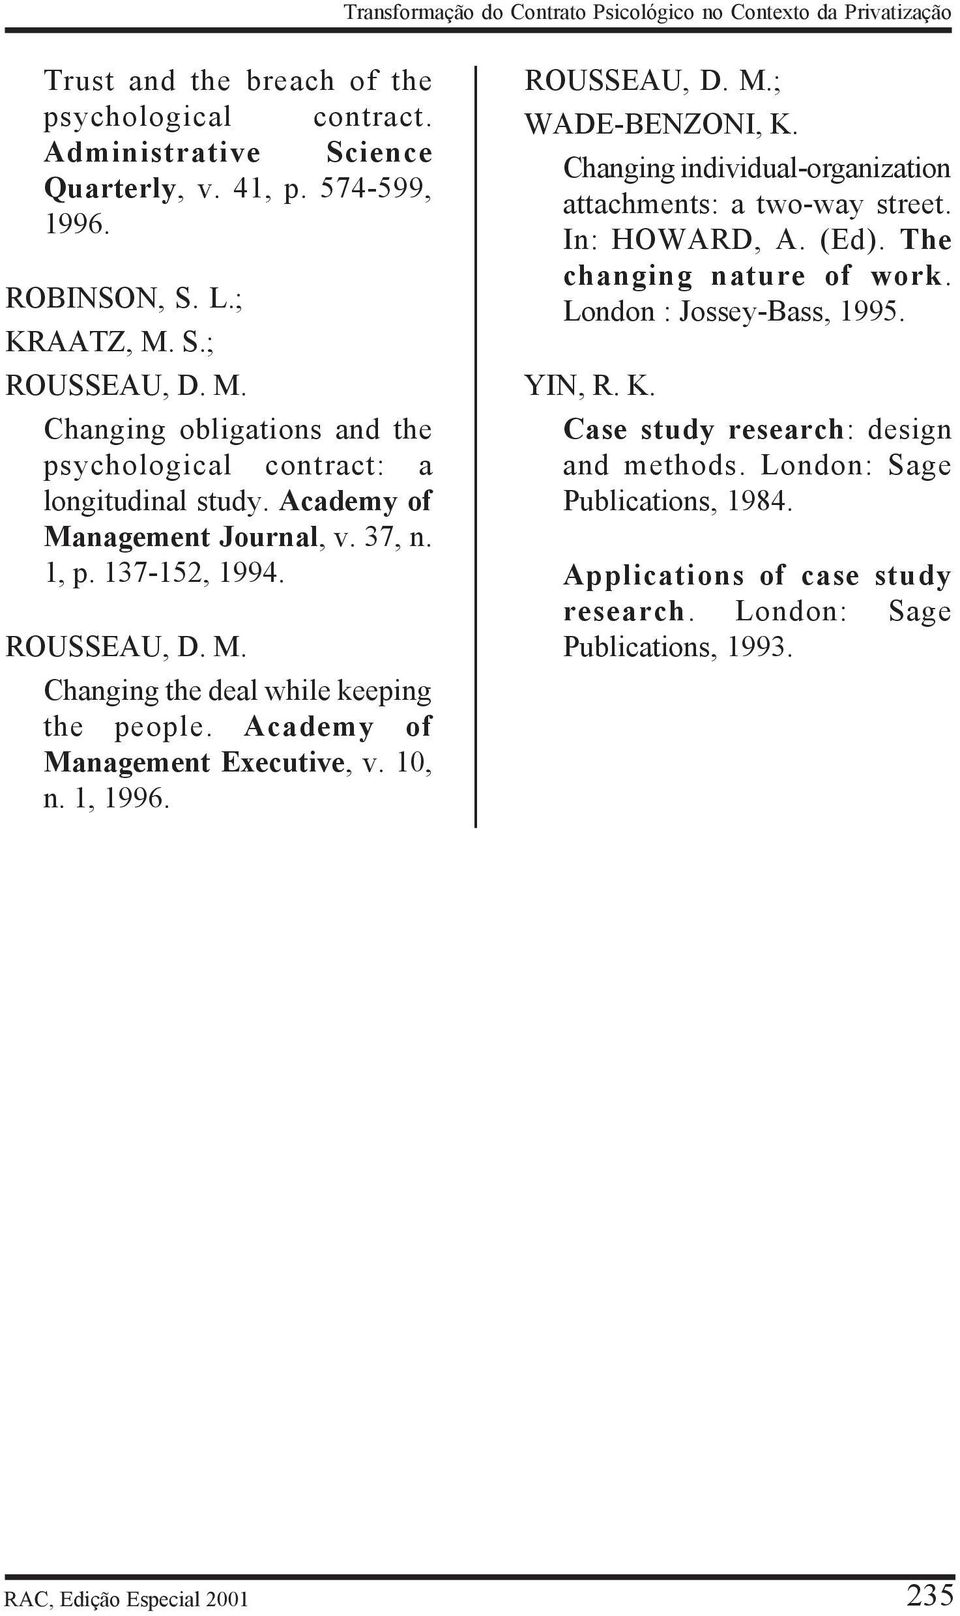 Academy of Management Executive, v. 10, n. 1, 1996. ROUSSEAU, D. M.; WADE-BENZONI, K. Changing individual-organization attachments: a two-way street. In: HOWARD, A. (Ed). The changing nature of work.